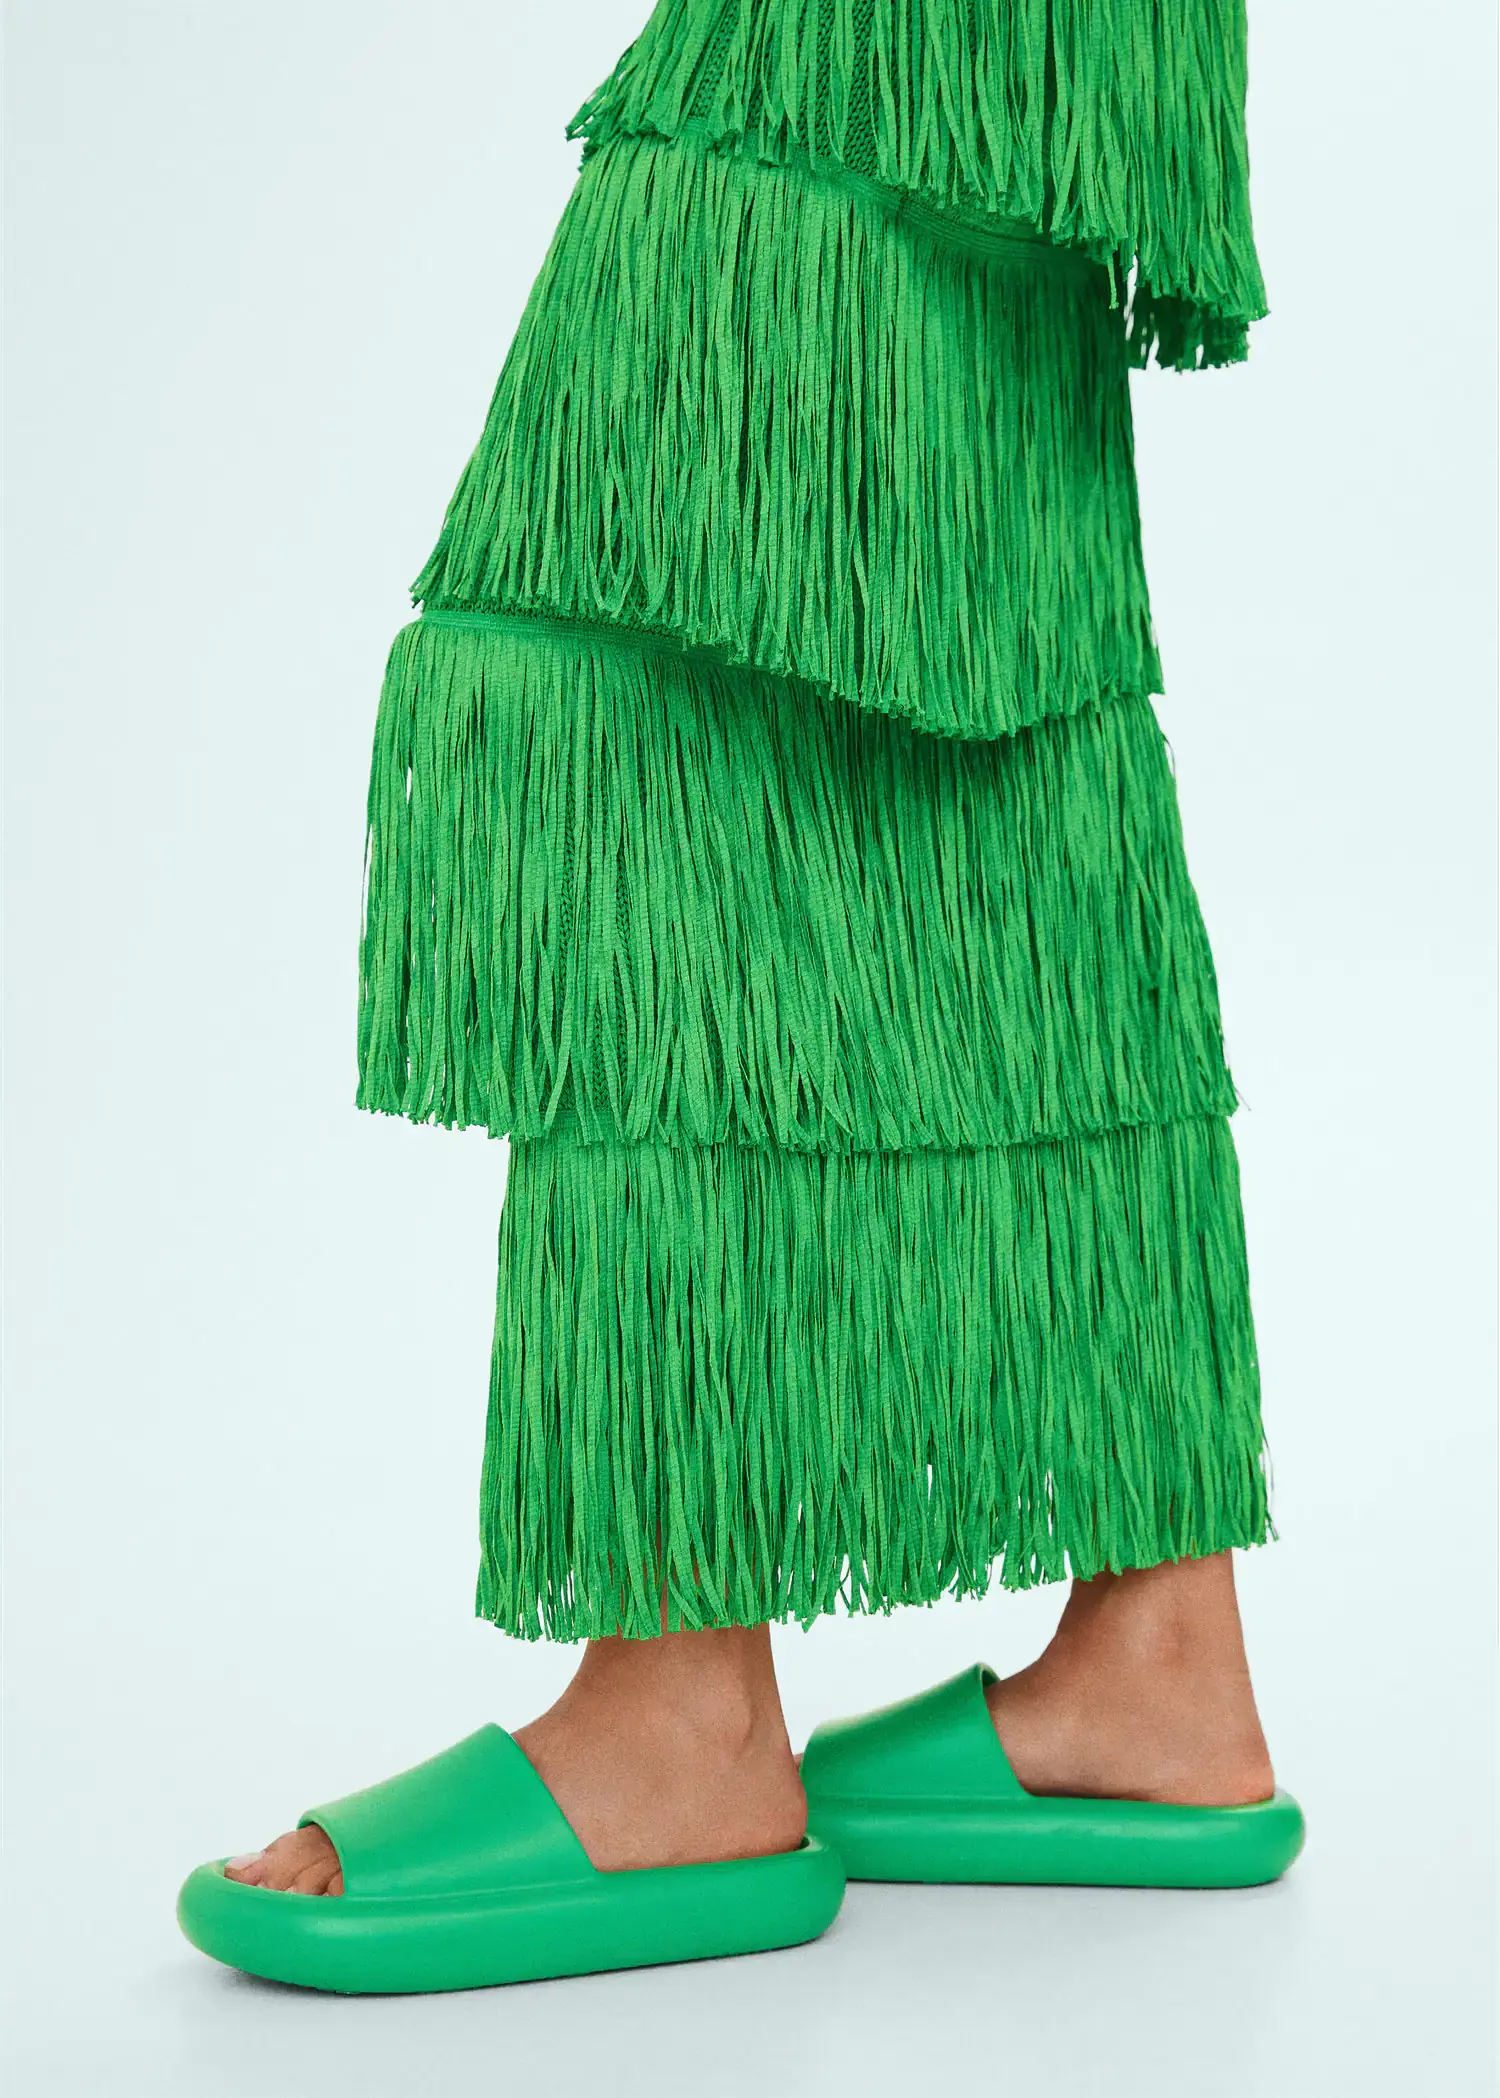 Mango Platform sandals. a person wearing green shoes and a green dress 